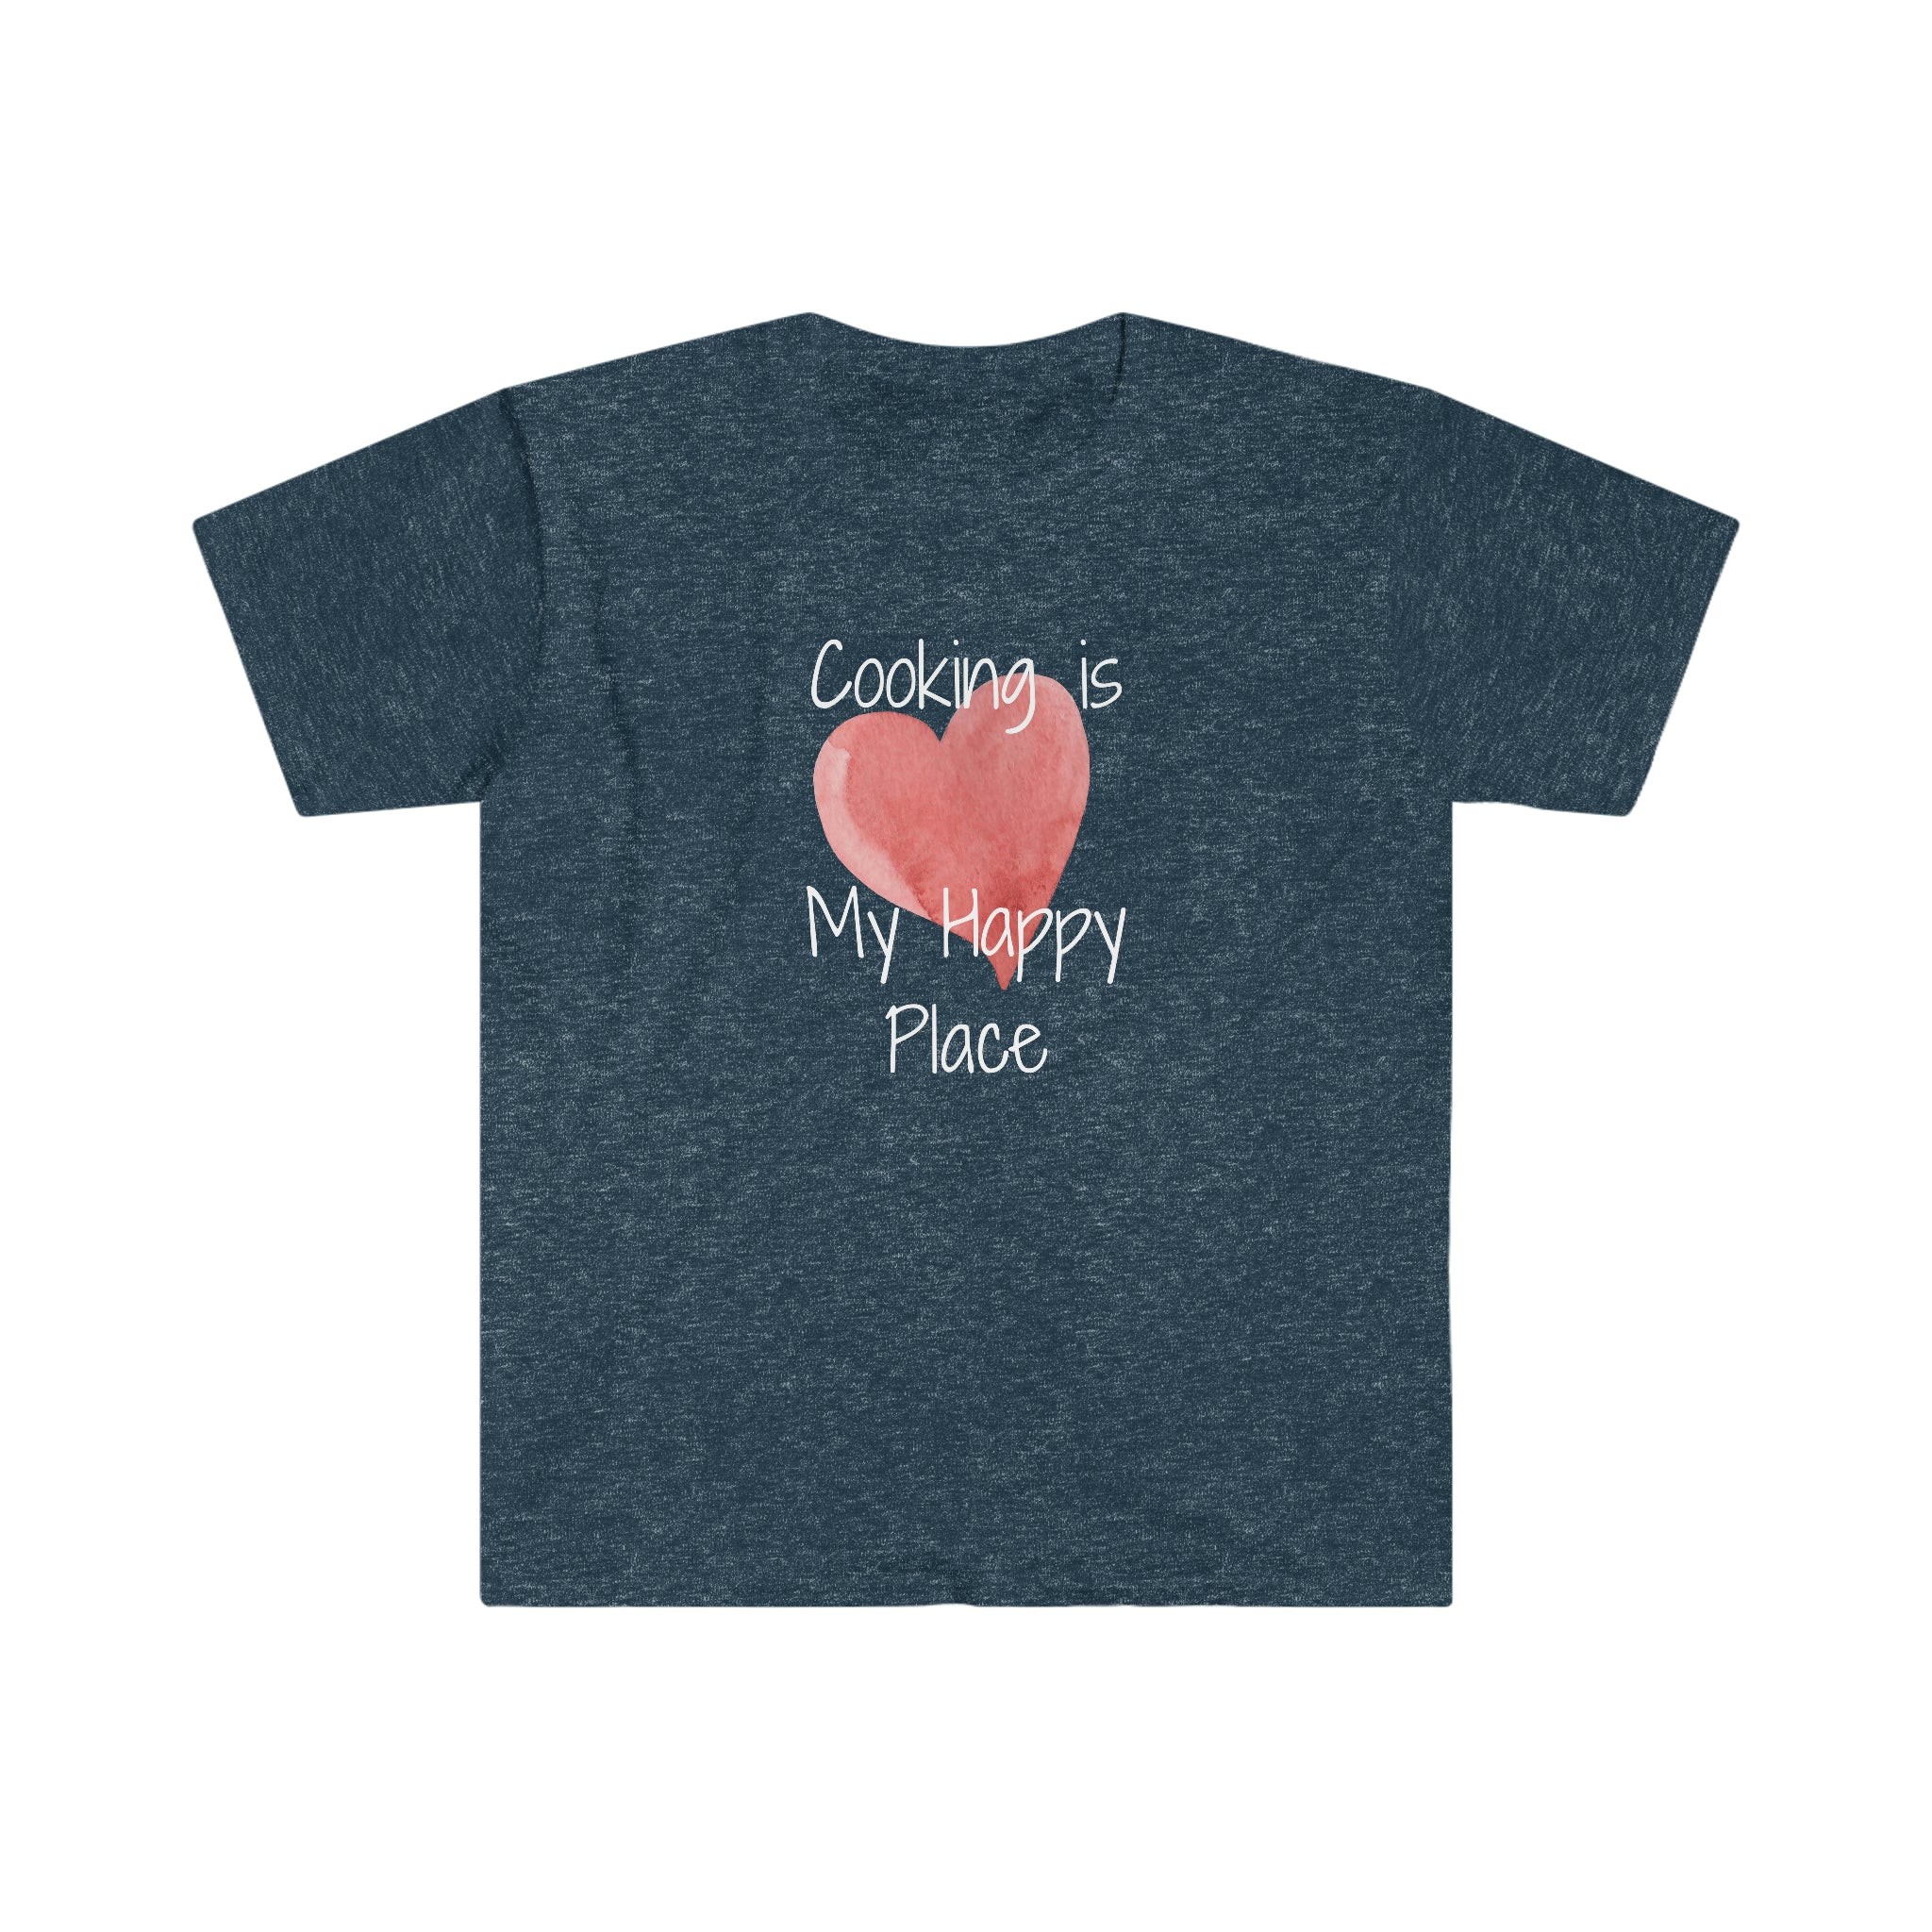 T-shirt, super soft, "Cooking is My Happy Place" T-Shirt - Comfortable, Chic and Playful - cooking t-shirt #10